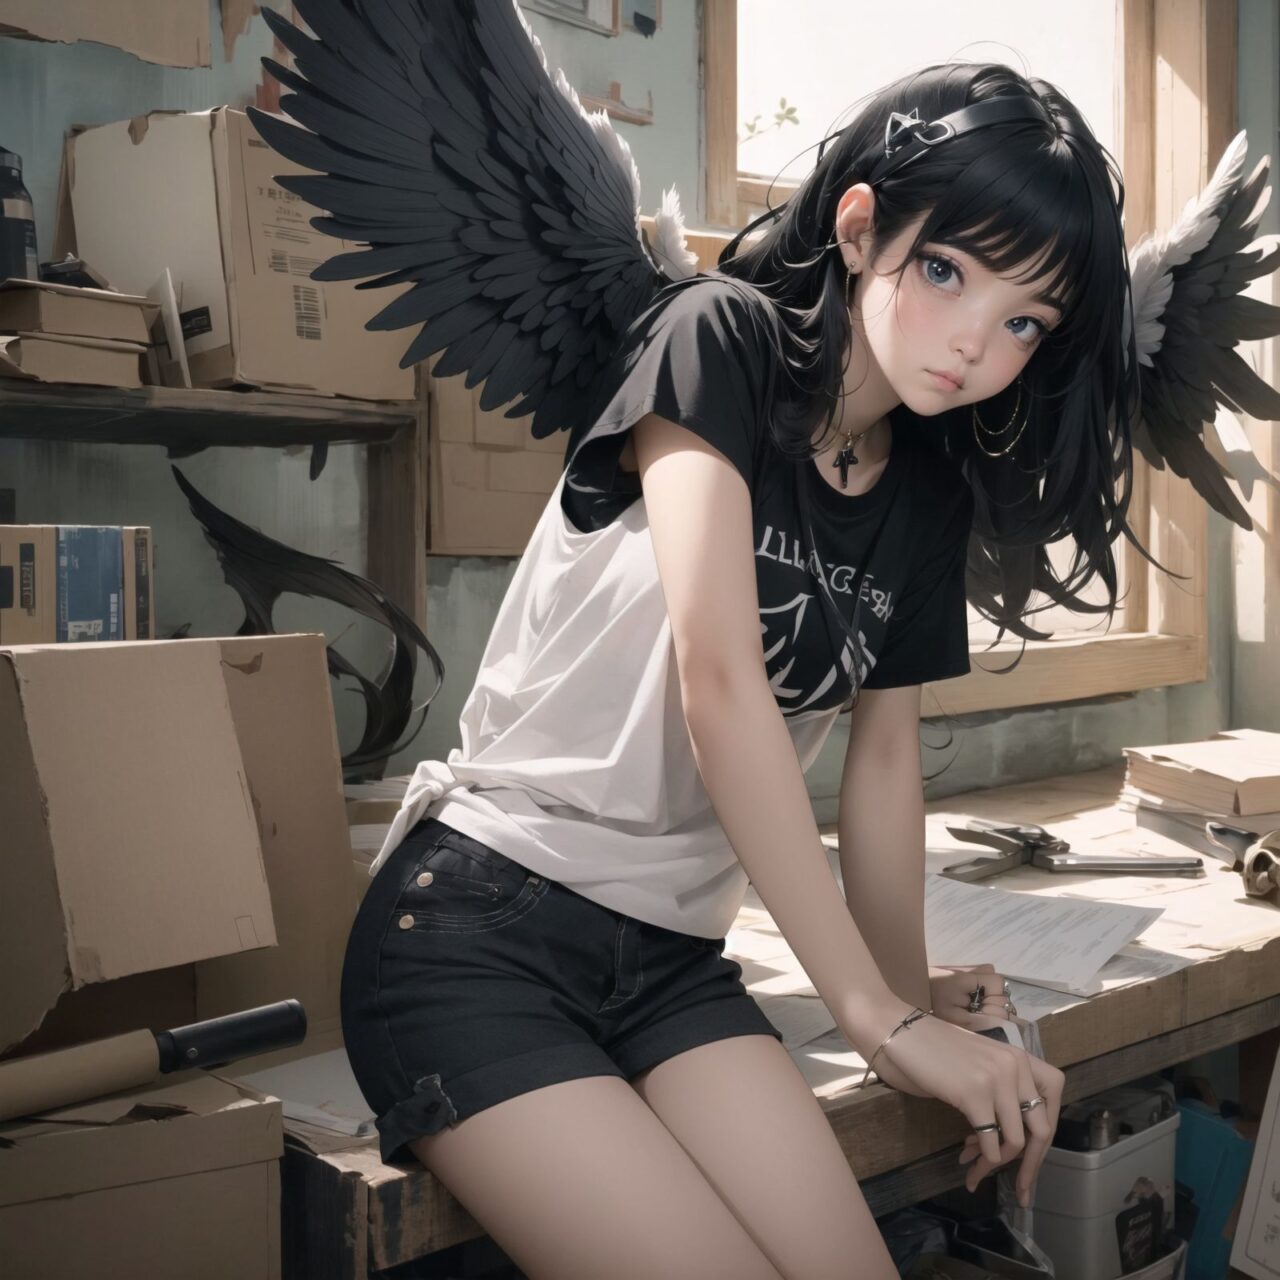 (Emo black angel: 1.5), angel ring and white feathers,
A girl is depicted in detail sitting in a cluttered room.
She is wearing a black T-shirt and shorts and has a lethargic expression on her face.
In the background are various notes and tools, as well as a bright yellow wall with a blue sky seen through the window, creating an ennui and chaotic atmosphere,